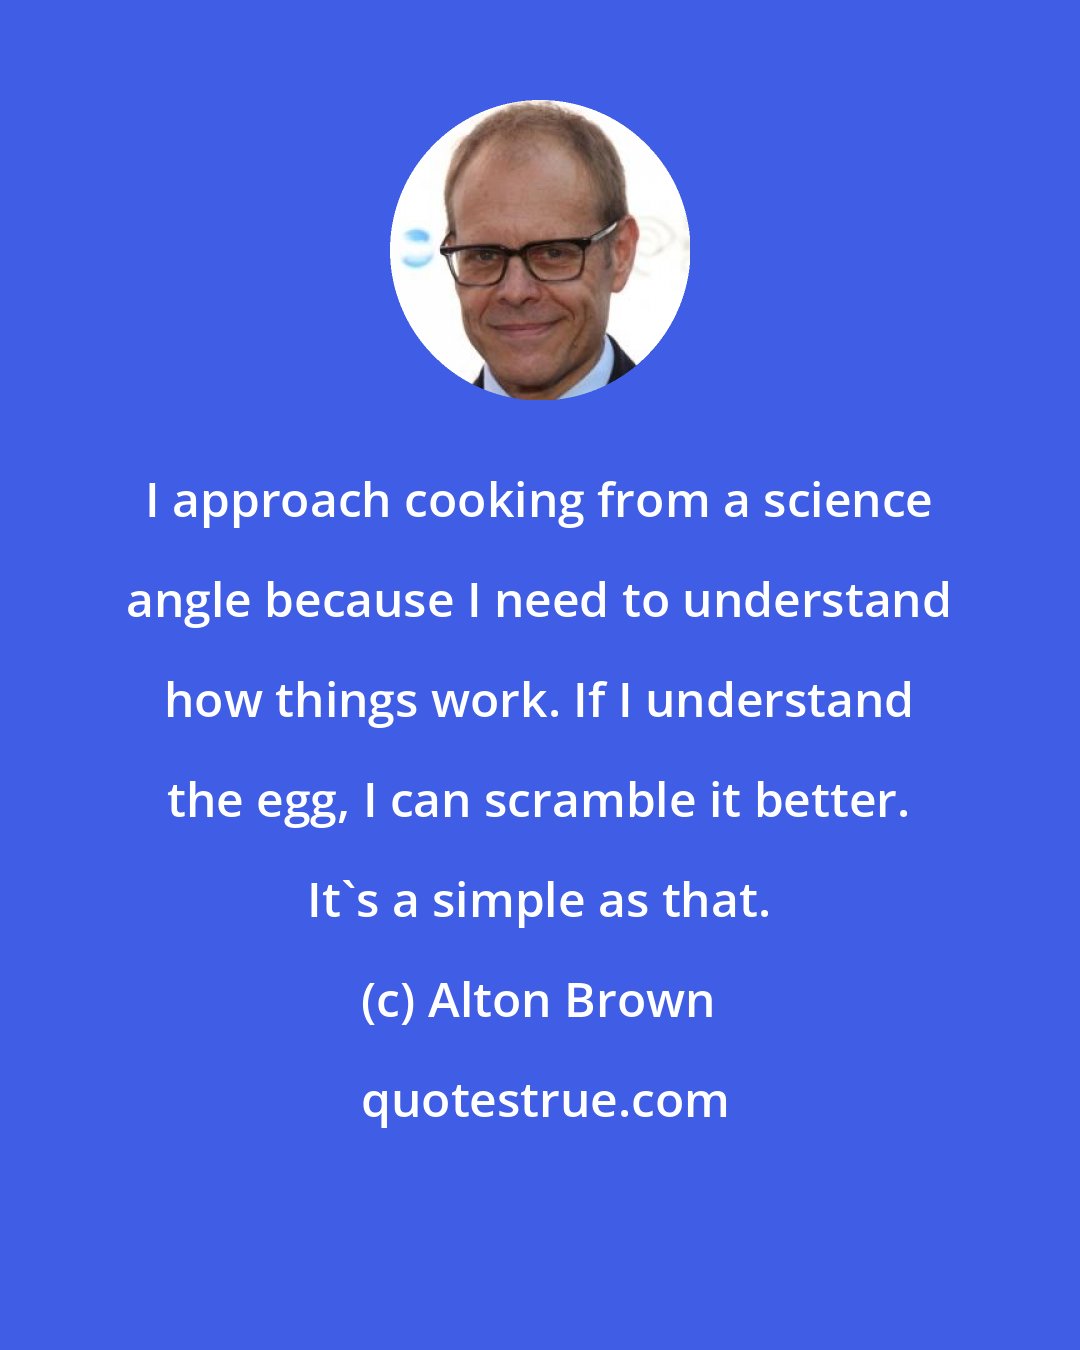 Alton Brown: I approach cooking from a science angle because I need to understand how things work. If I understand the egg, I can scramble it better. It's a simple as that.